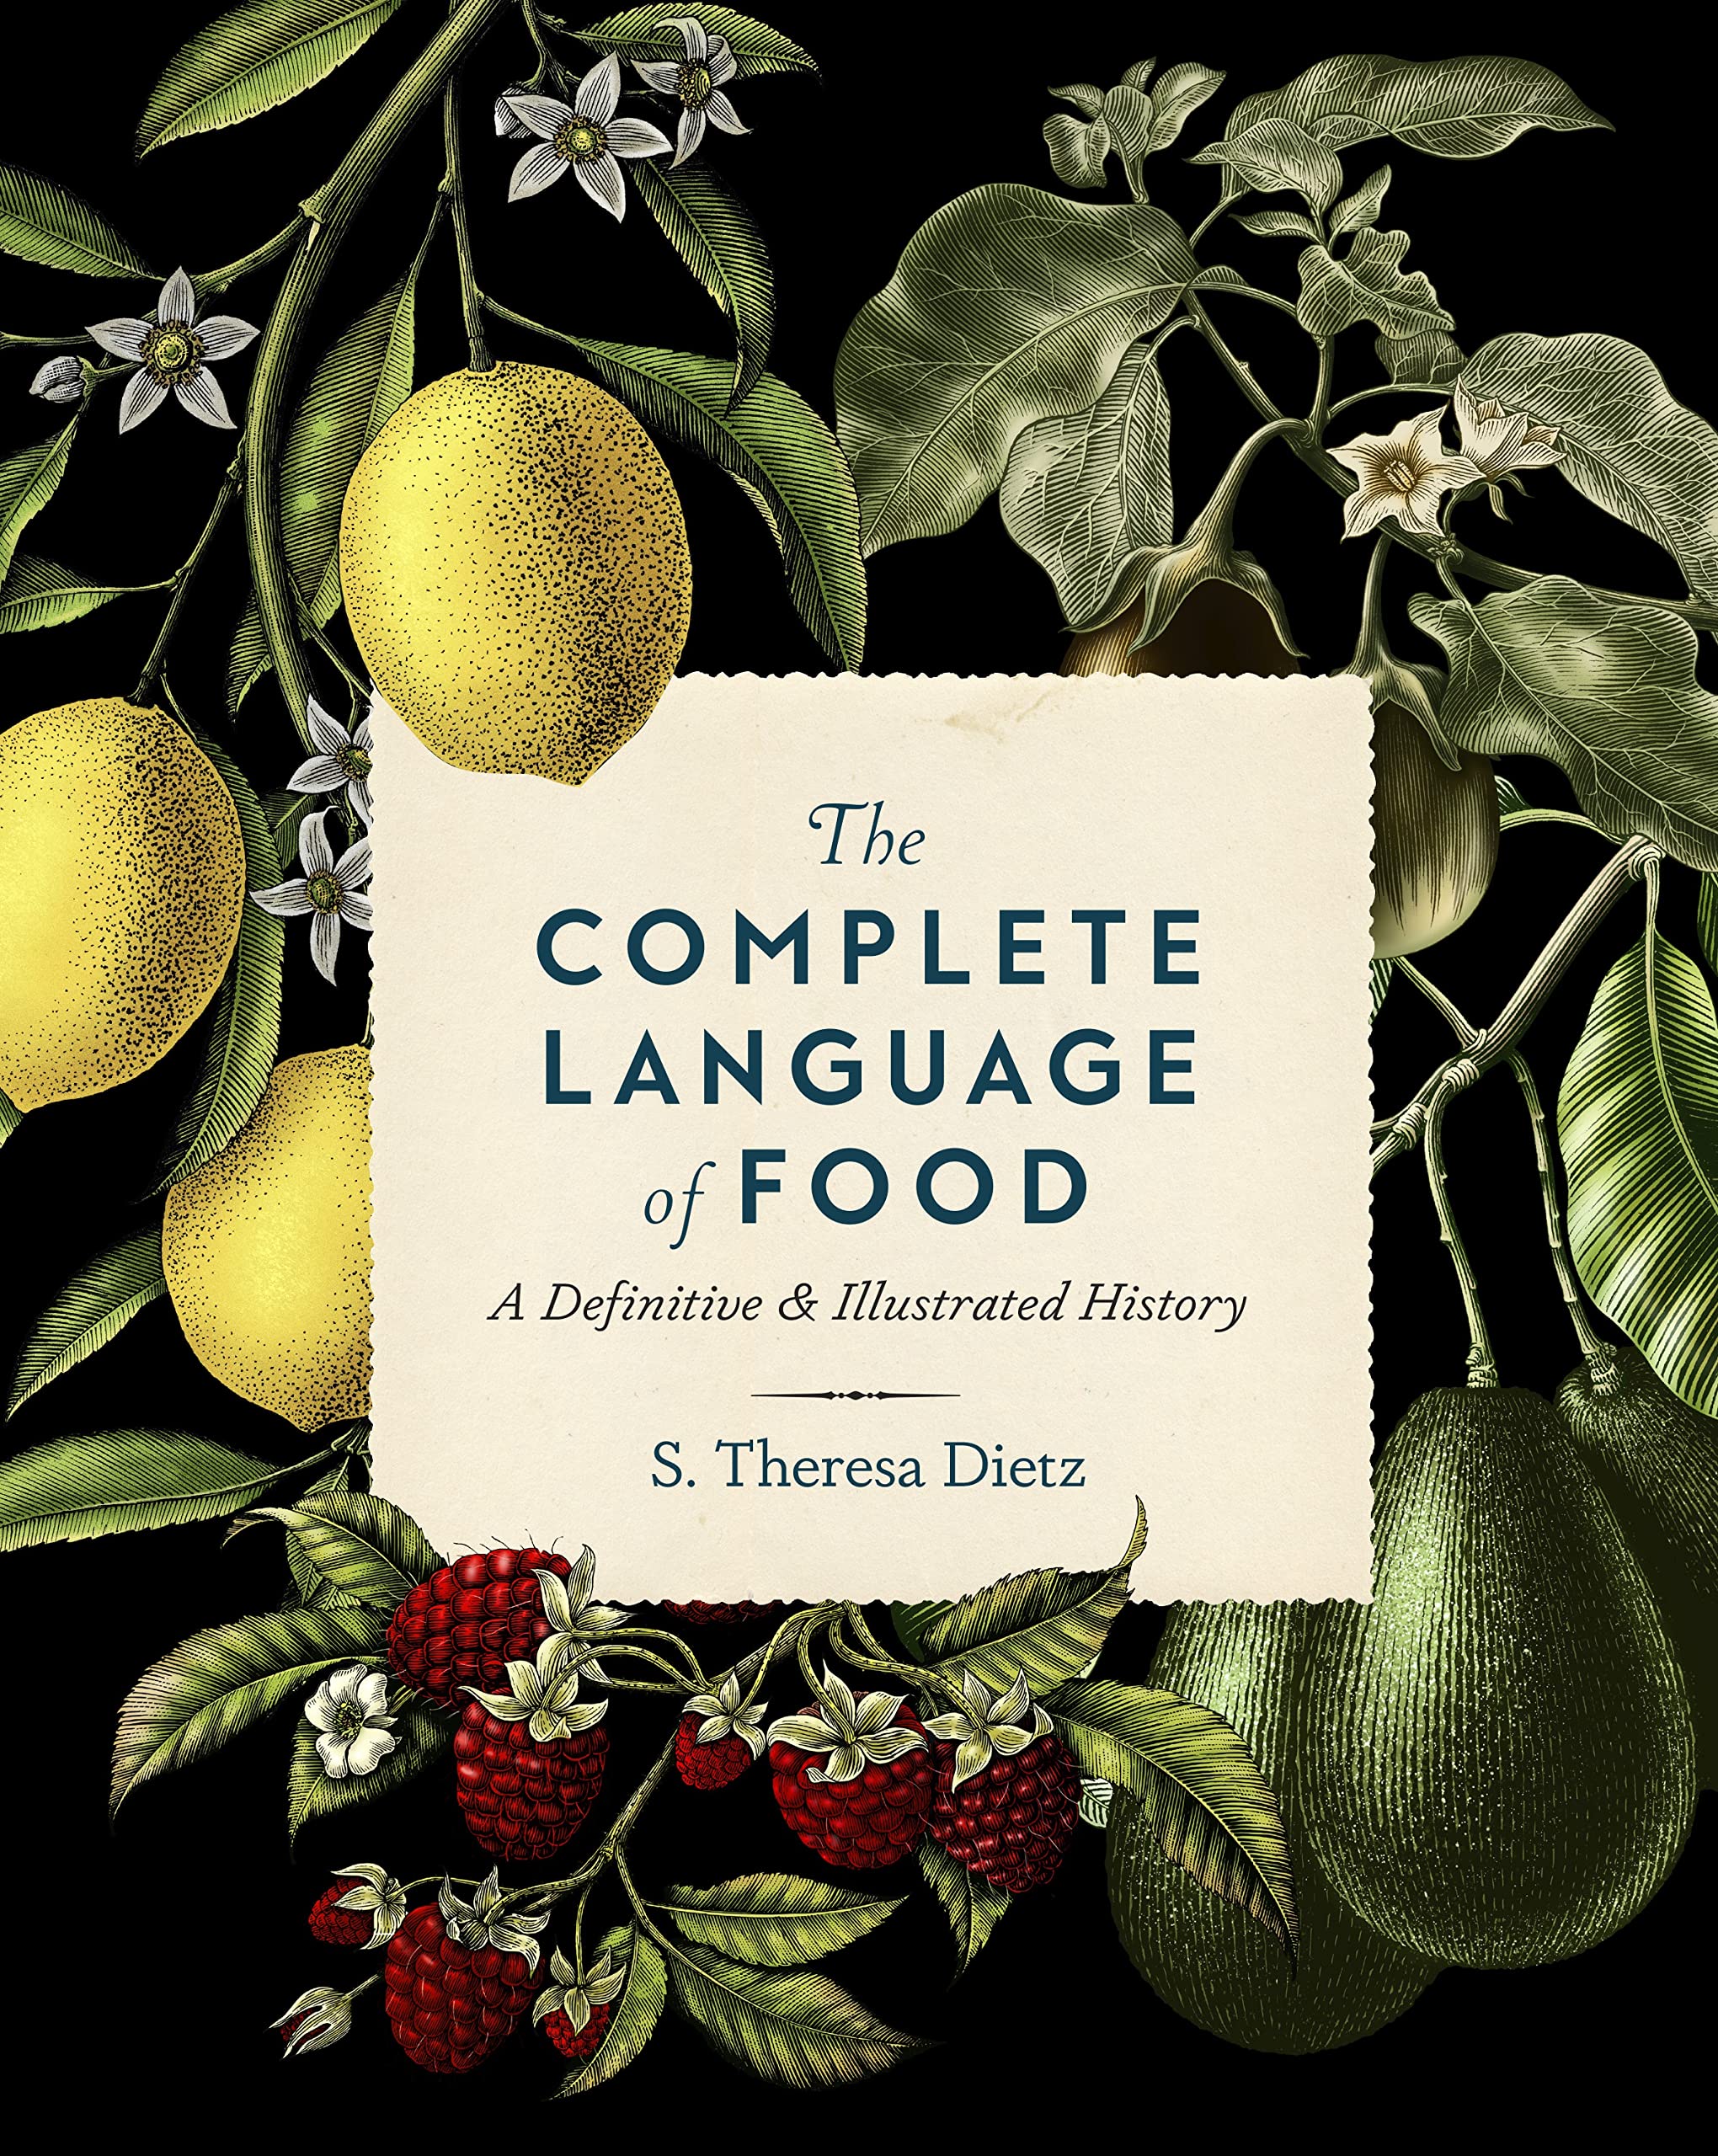 The Complete Language of Food: A Definitive & Illustrated History (S. Theresa Dietz)